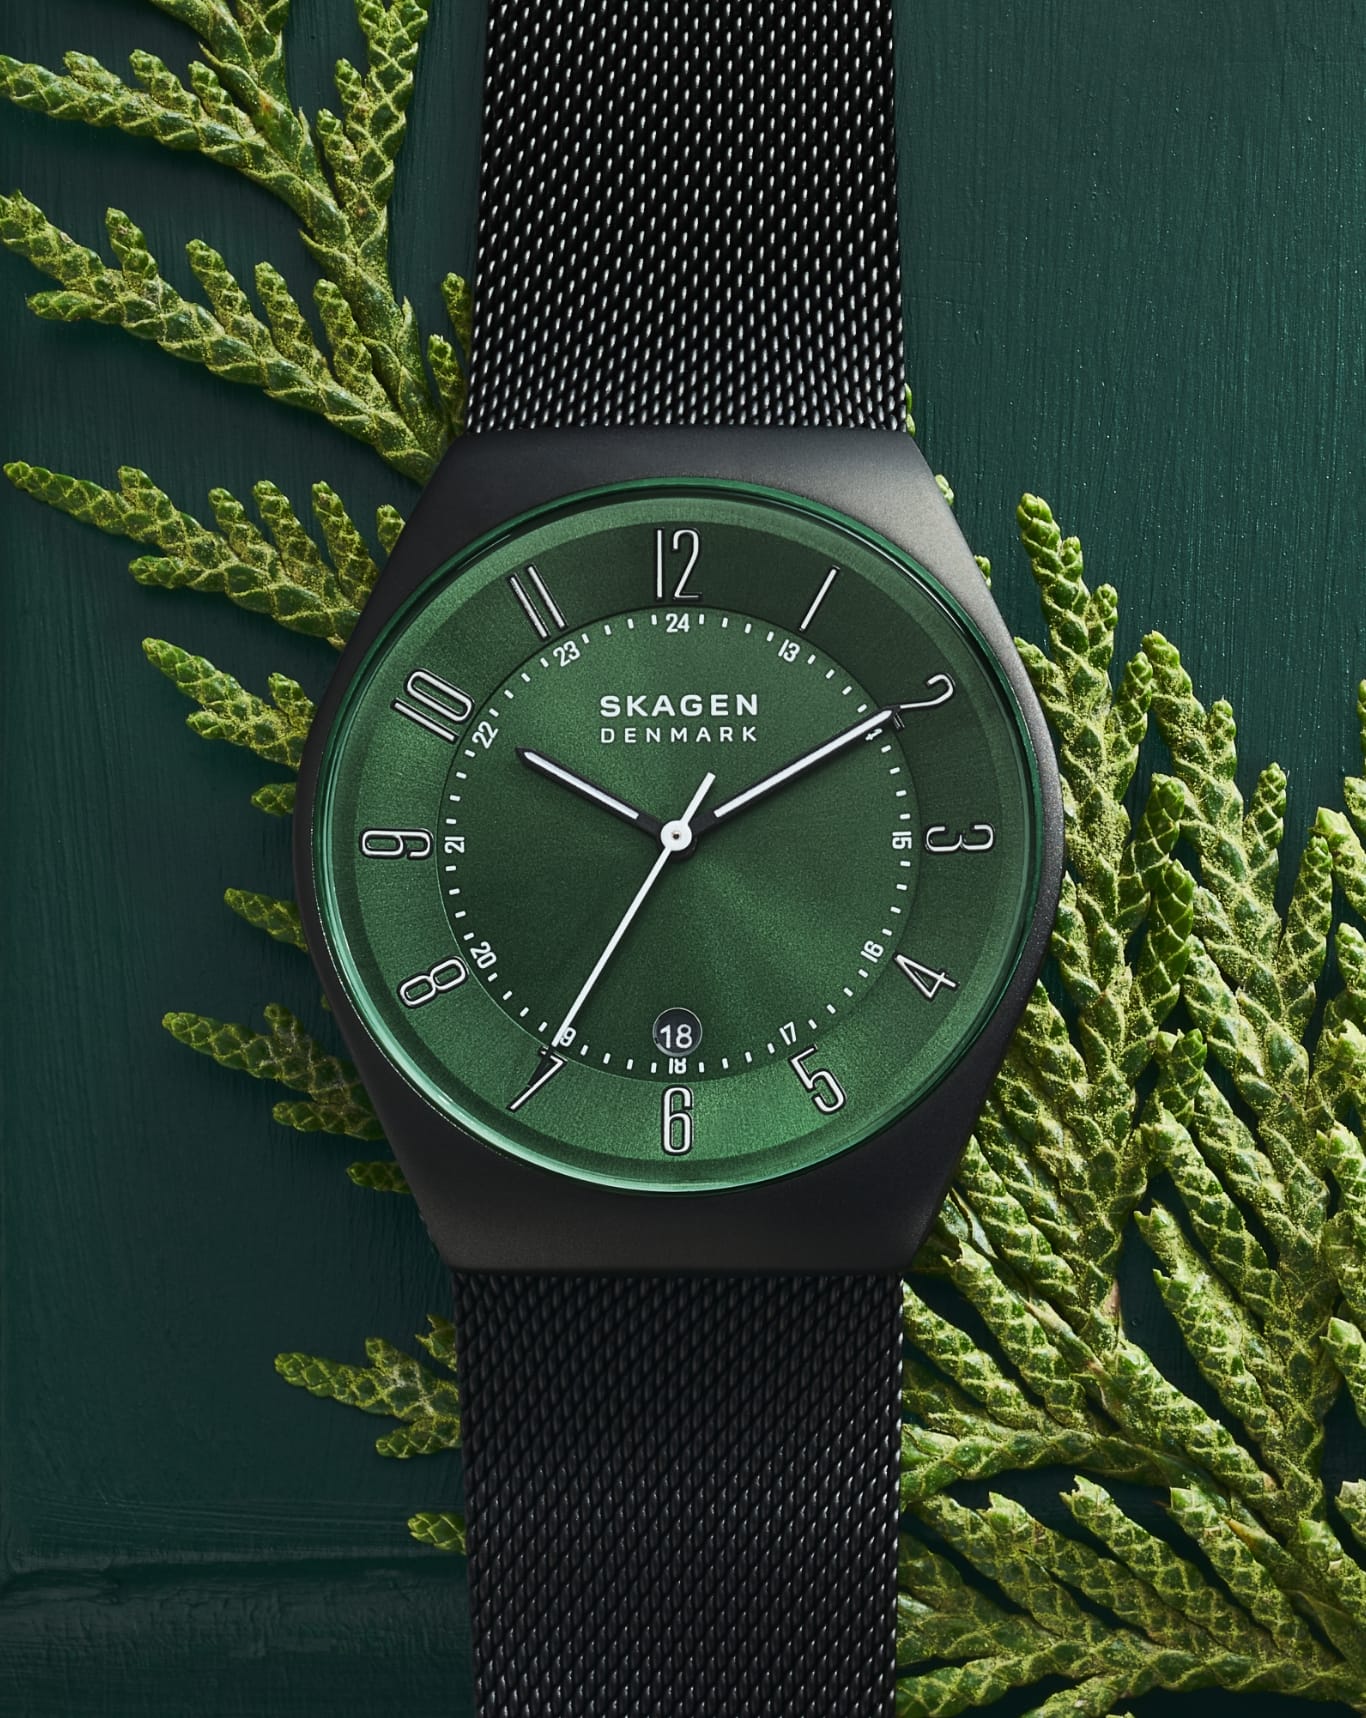 Image of a watch with a green dial